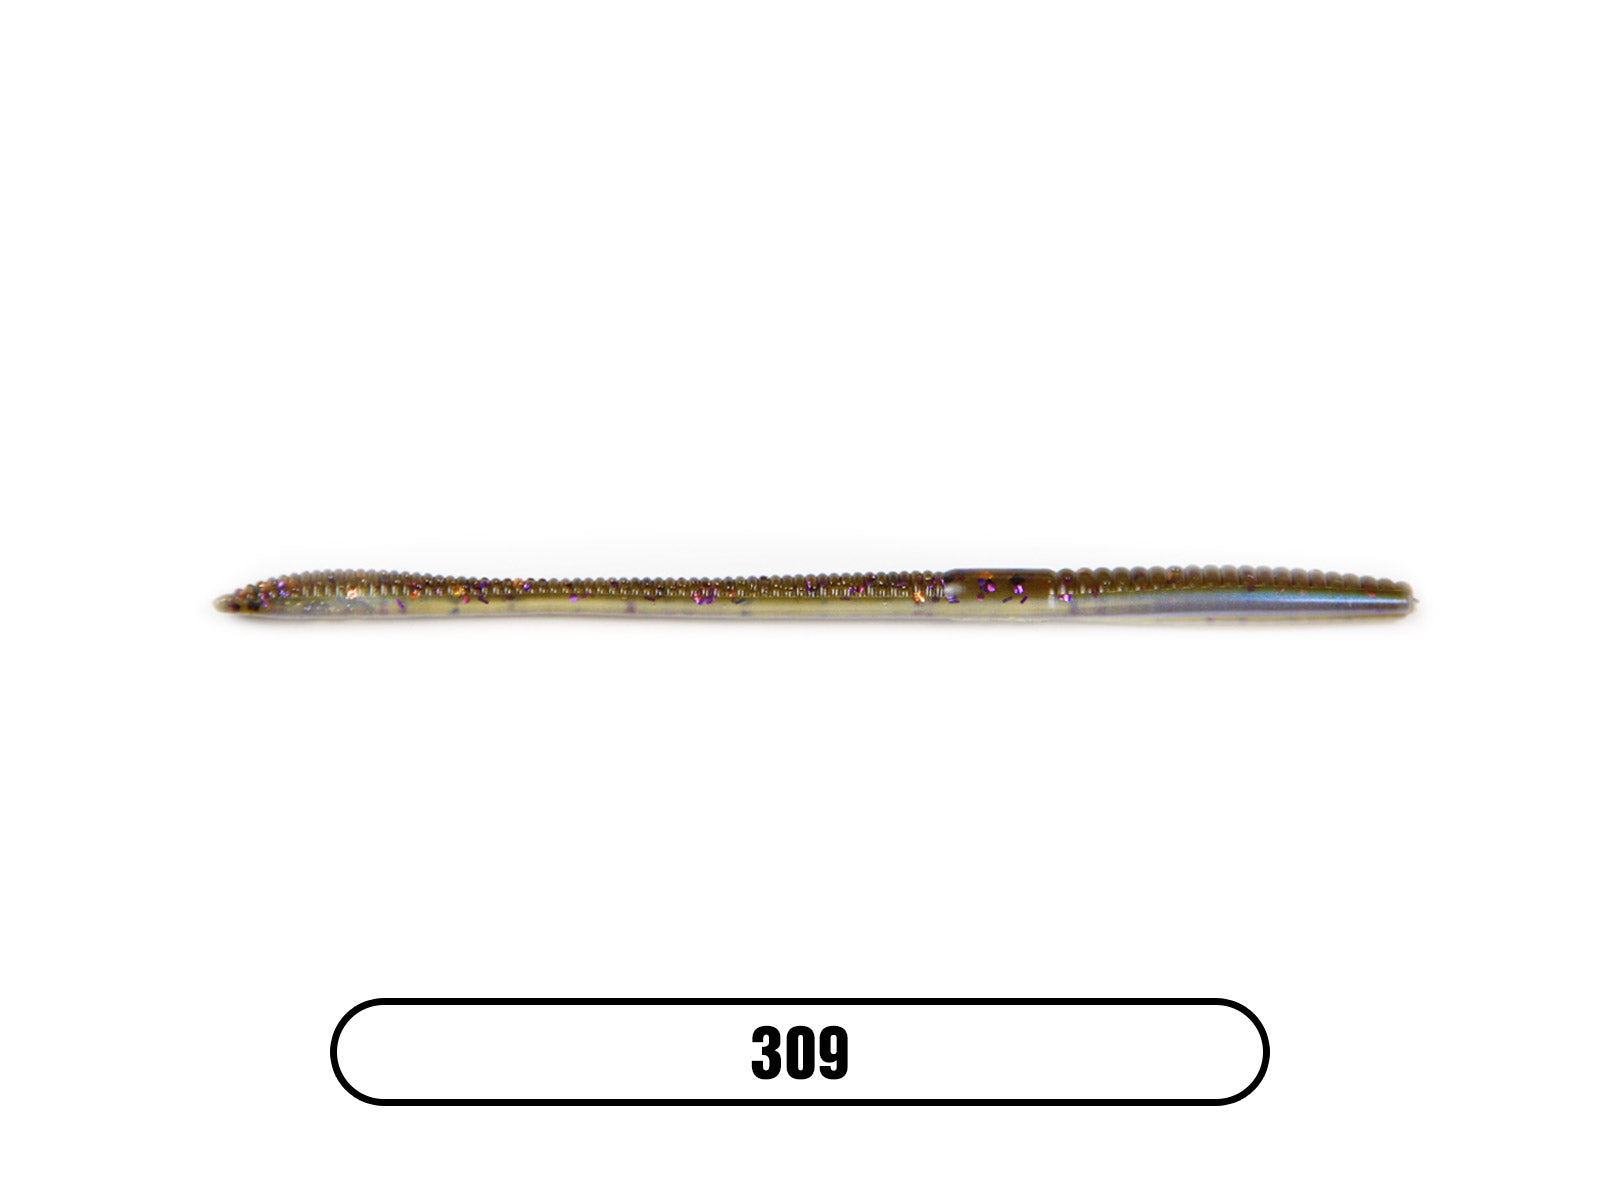 Soft Plastic Finesse Worm Bait for Largemouth Bass Fishing, Smallmouth Bass and Walleye Fishing Lure